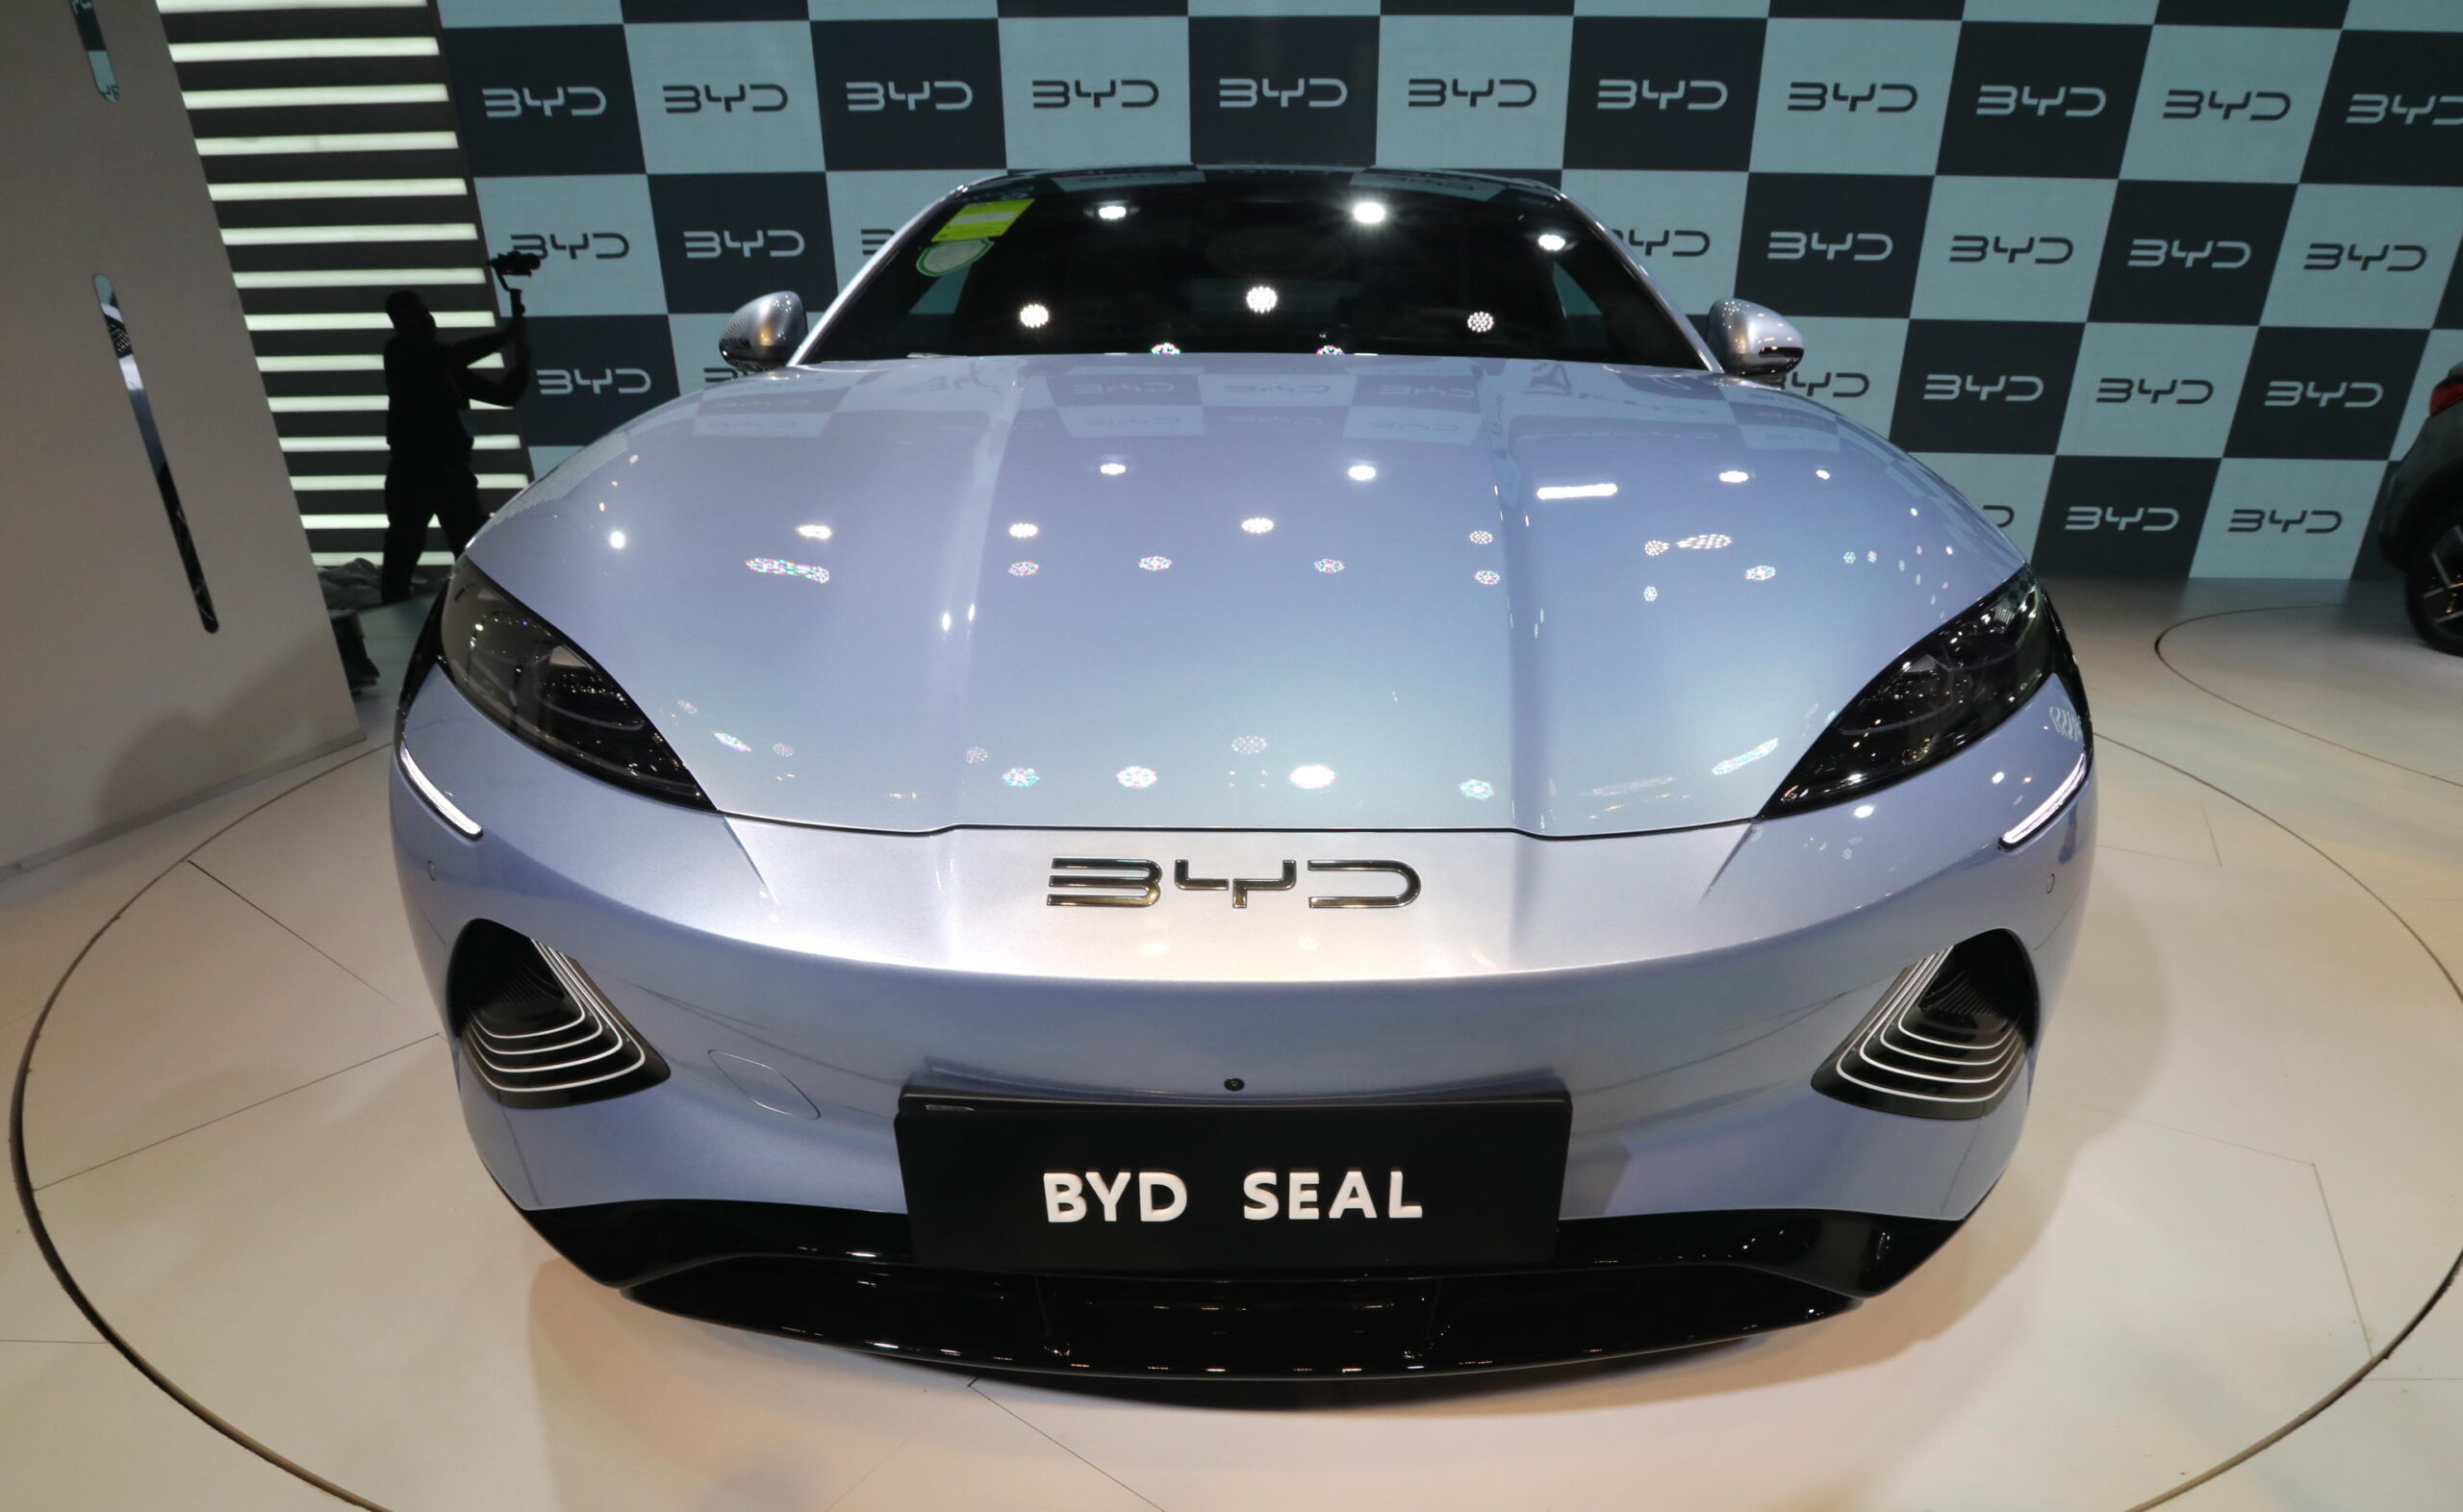 epa10399614 The newly launched BYD Seal electric car at the Auto Expo in Greater Noida, Uttar Pradesh, India, 11 January 2023. The Auto Expo 2023 will open to the public from 14 to 18 January.  EPA/RAJAT GUPTA